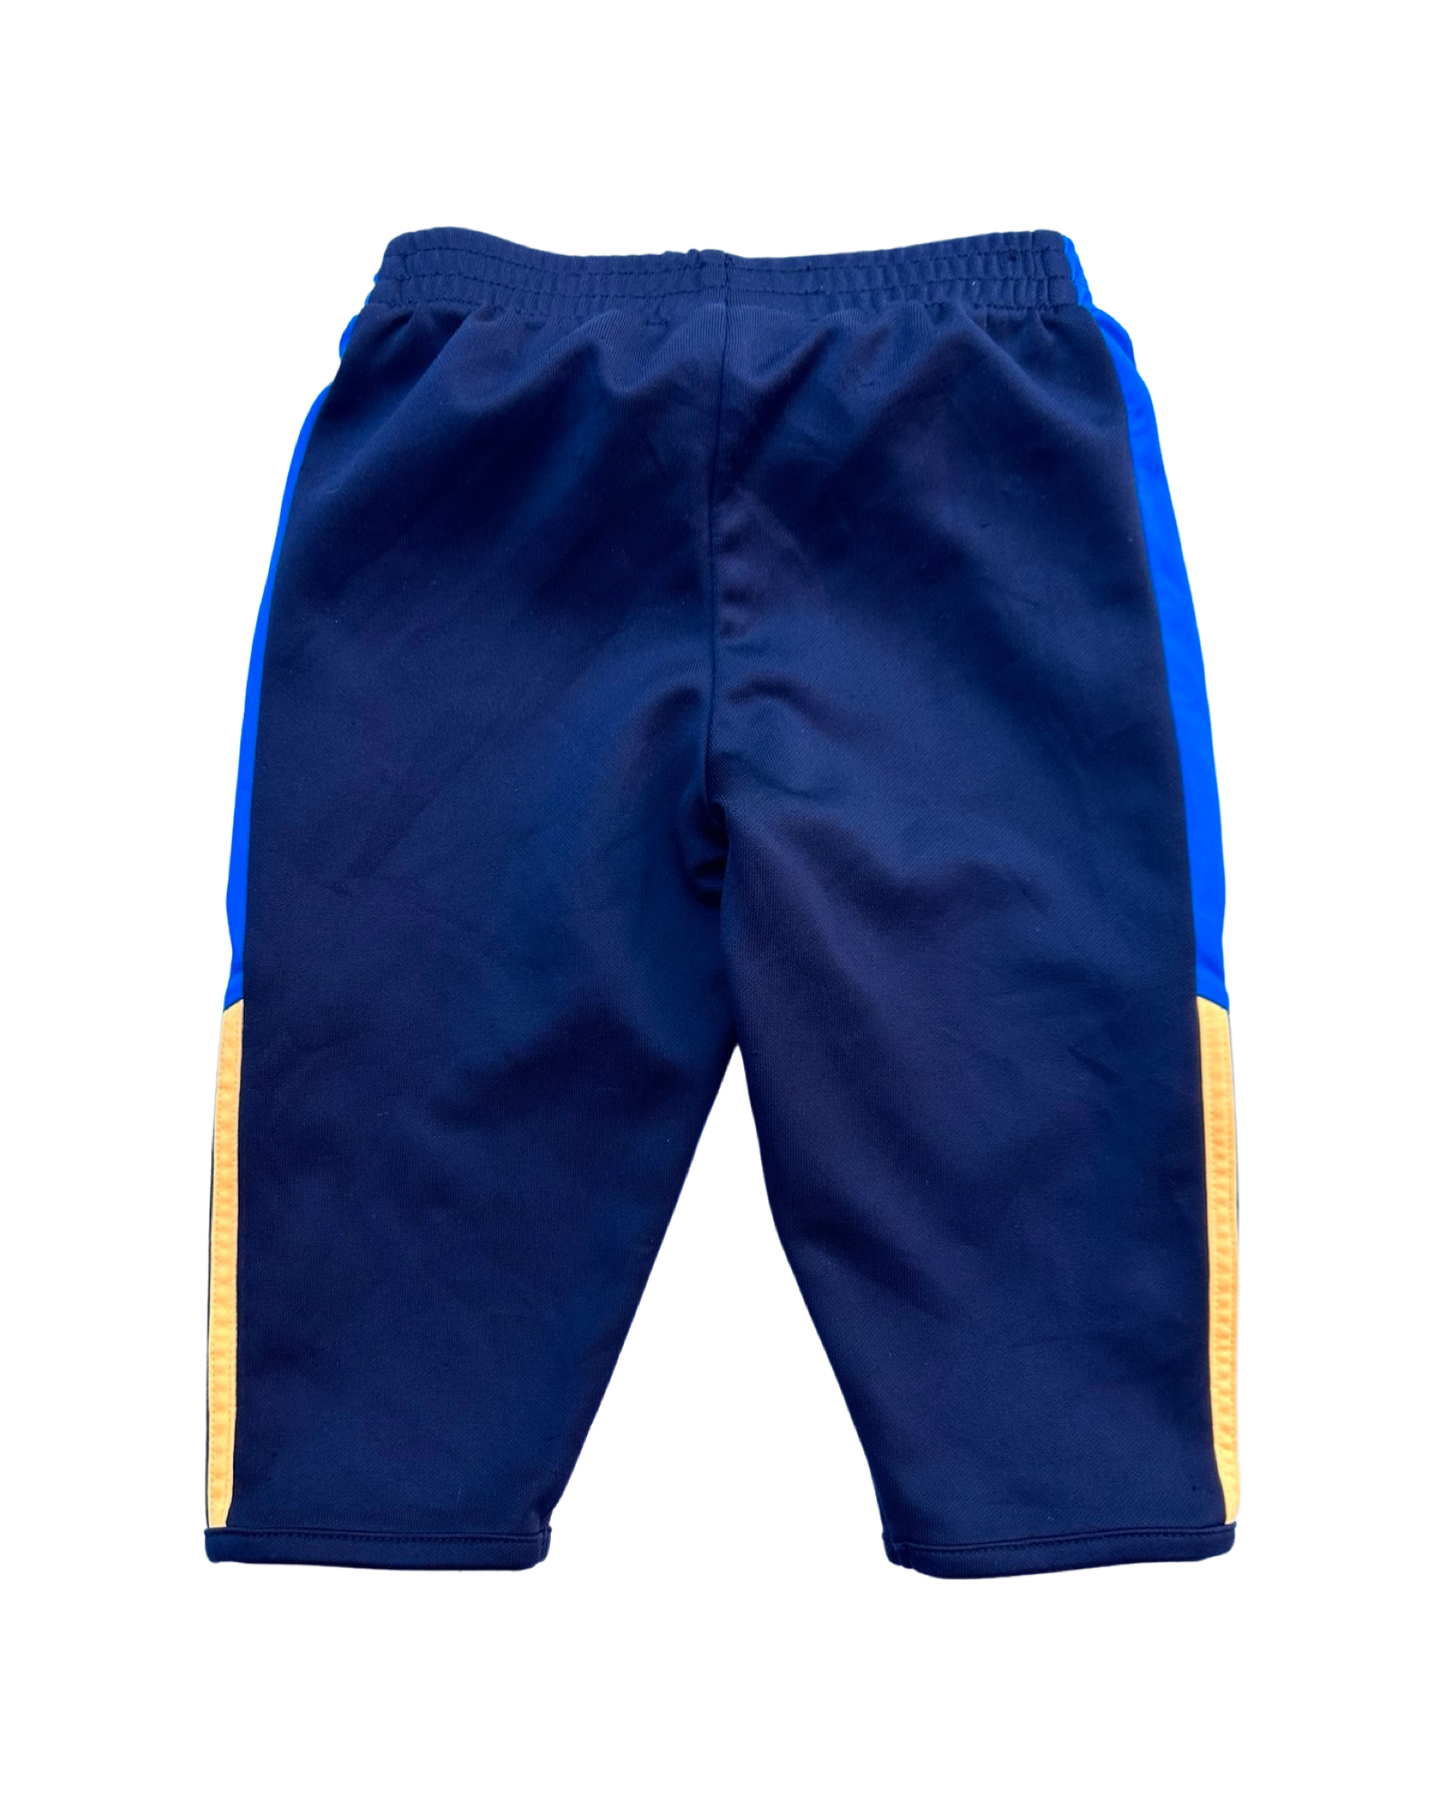 Vintage Adidas 3 stripe joggers in black/blue/yellow (9-12mths)